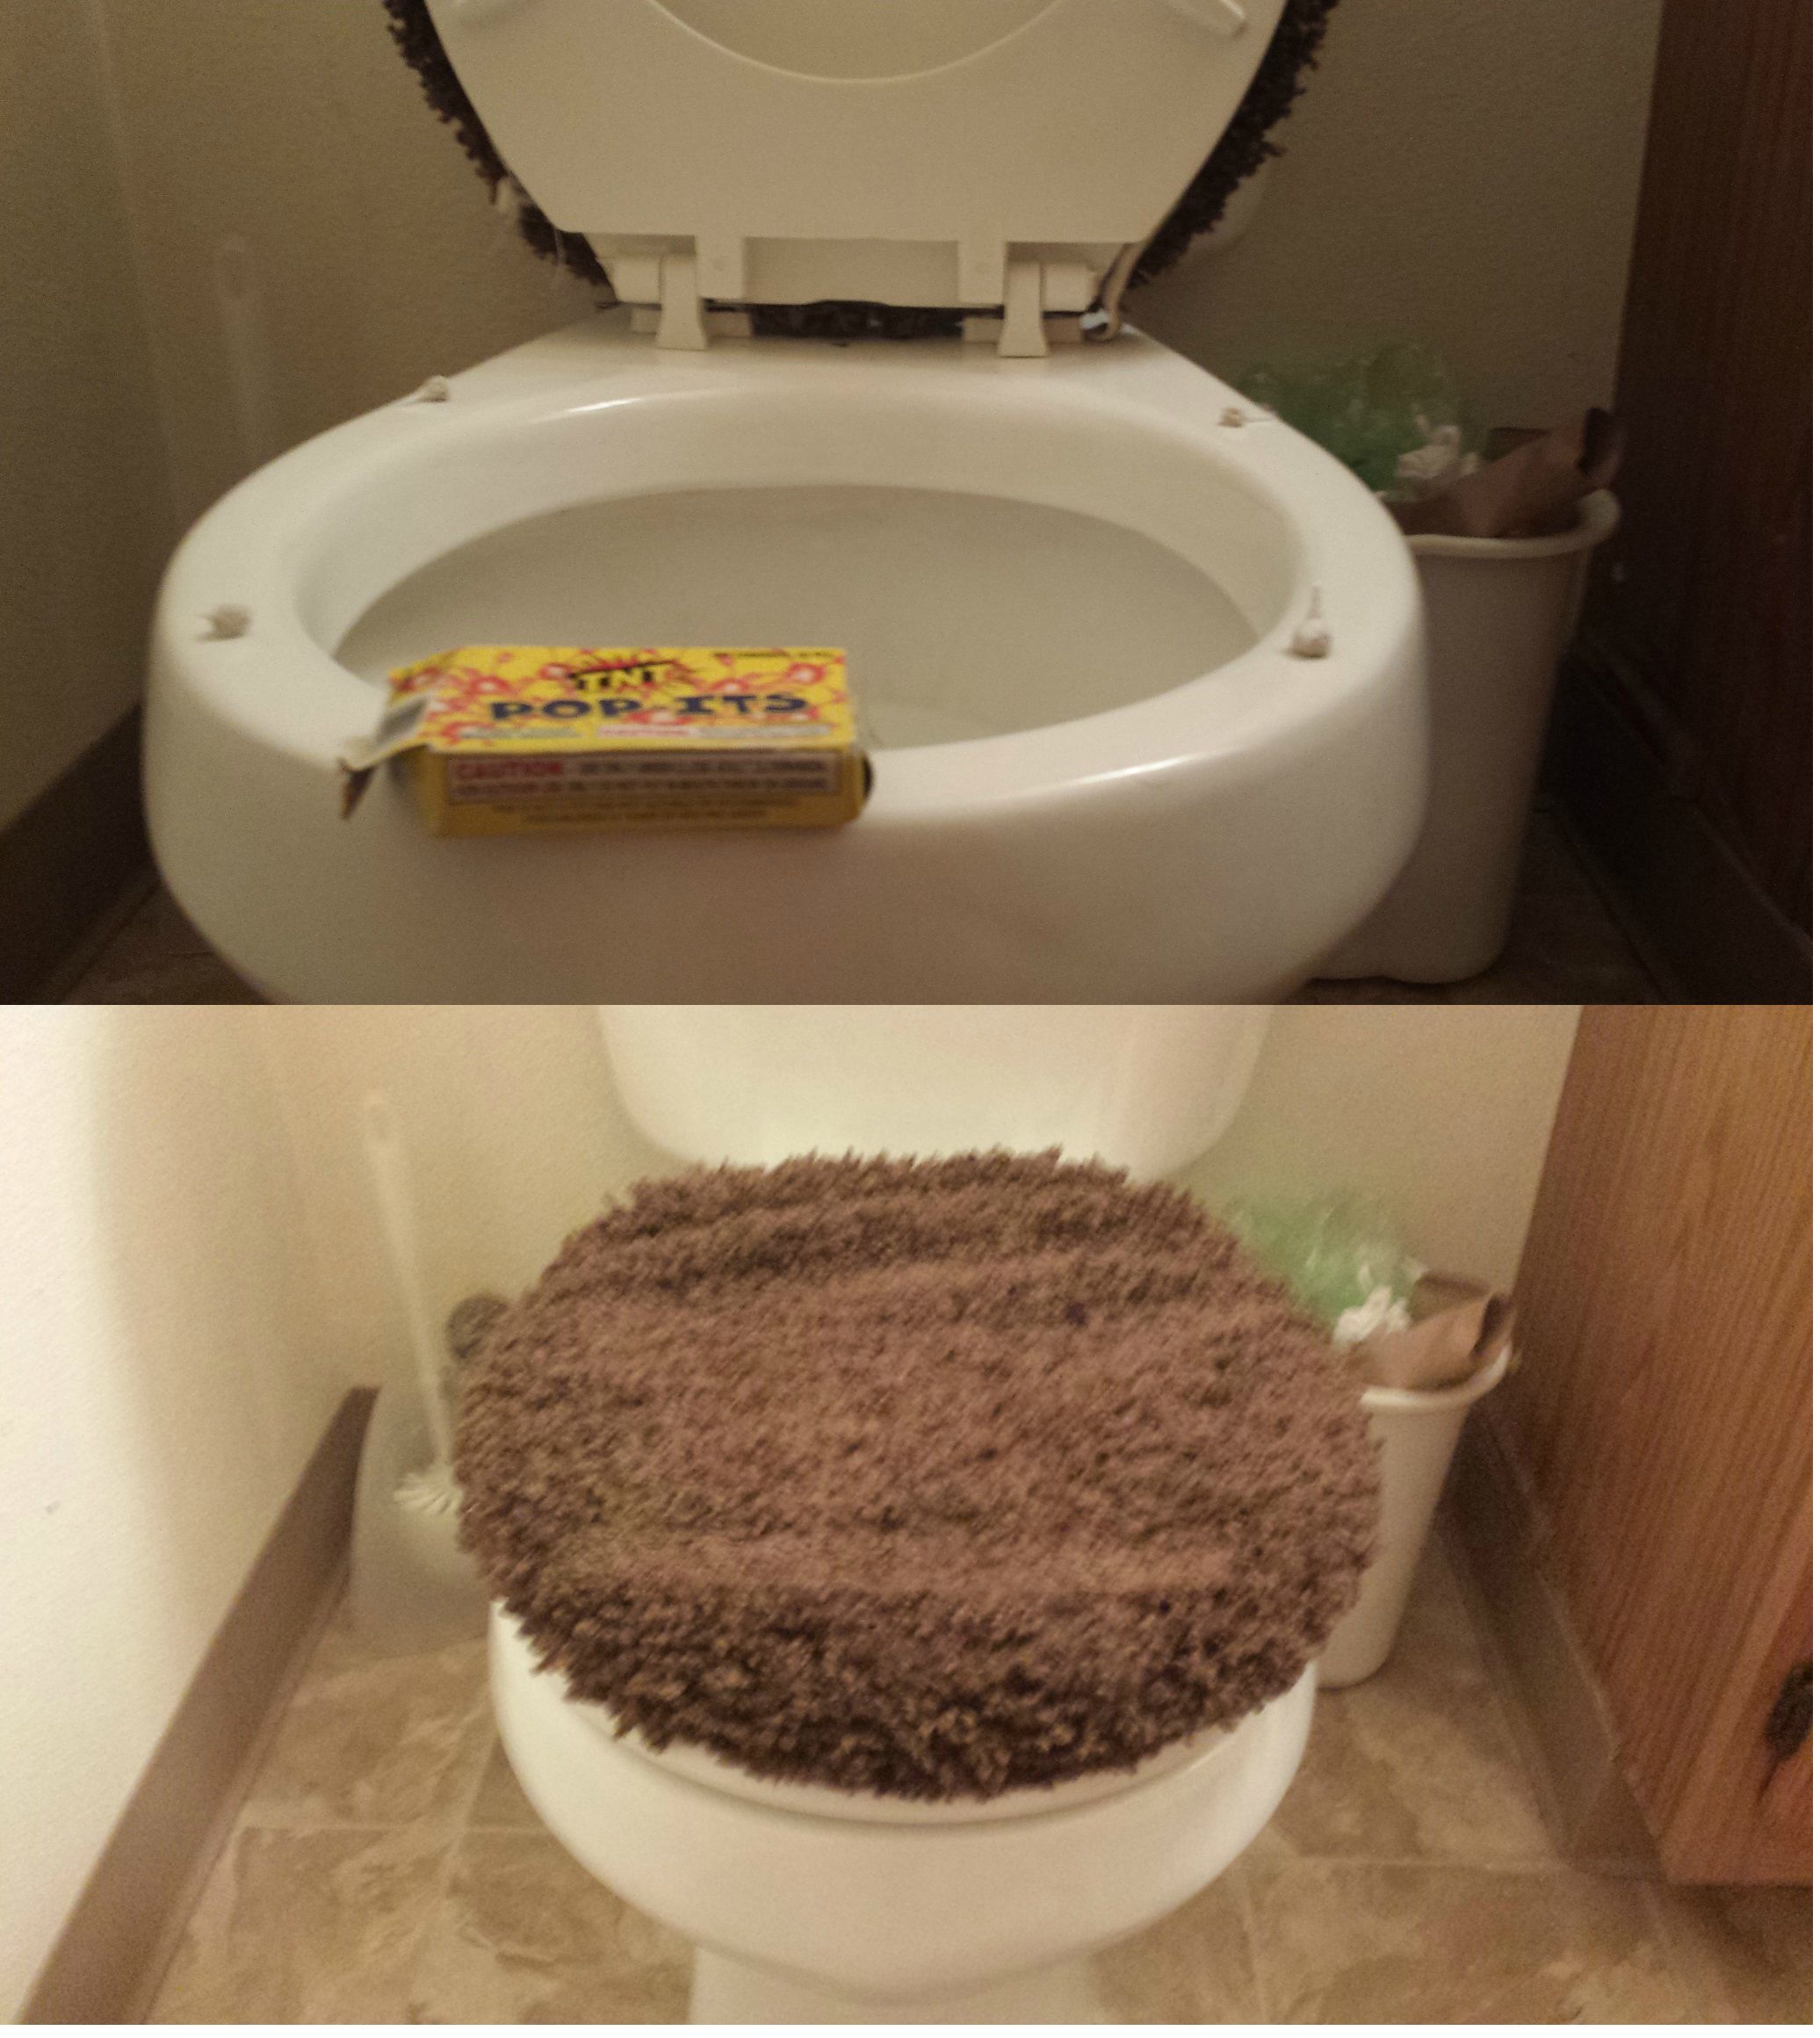 16 Great Pranks You Can Actually Use